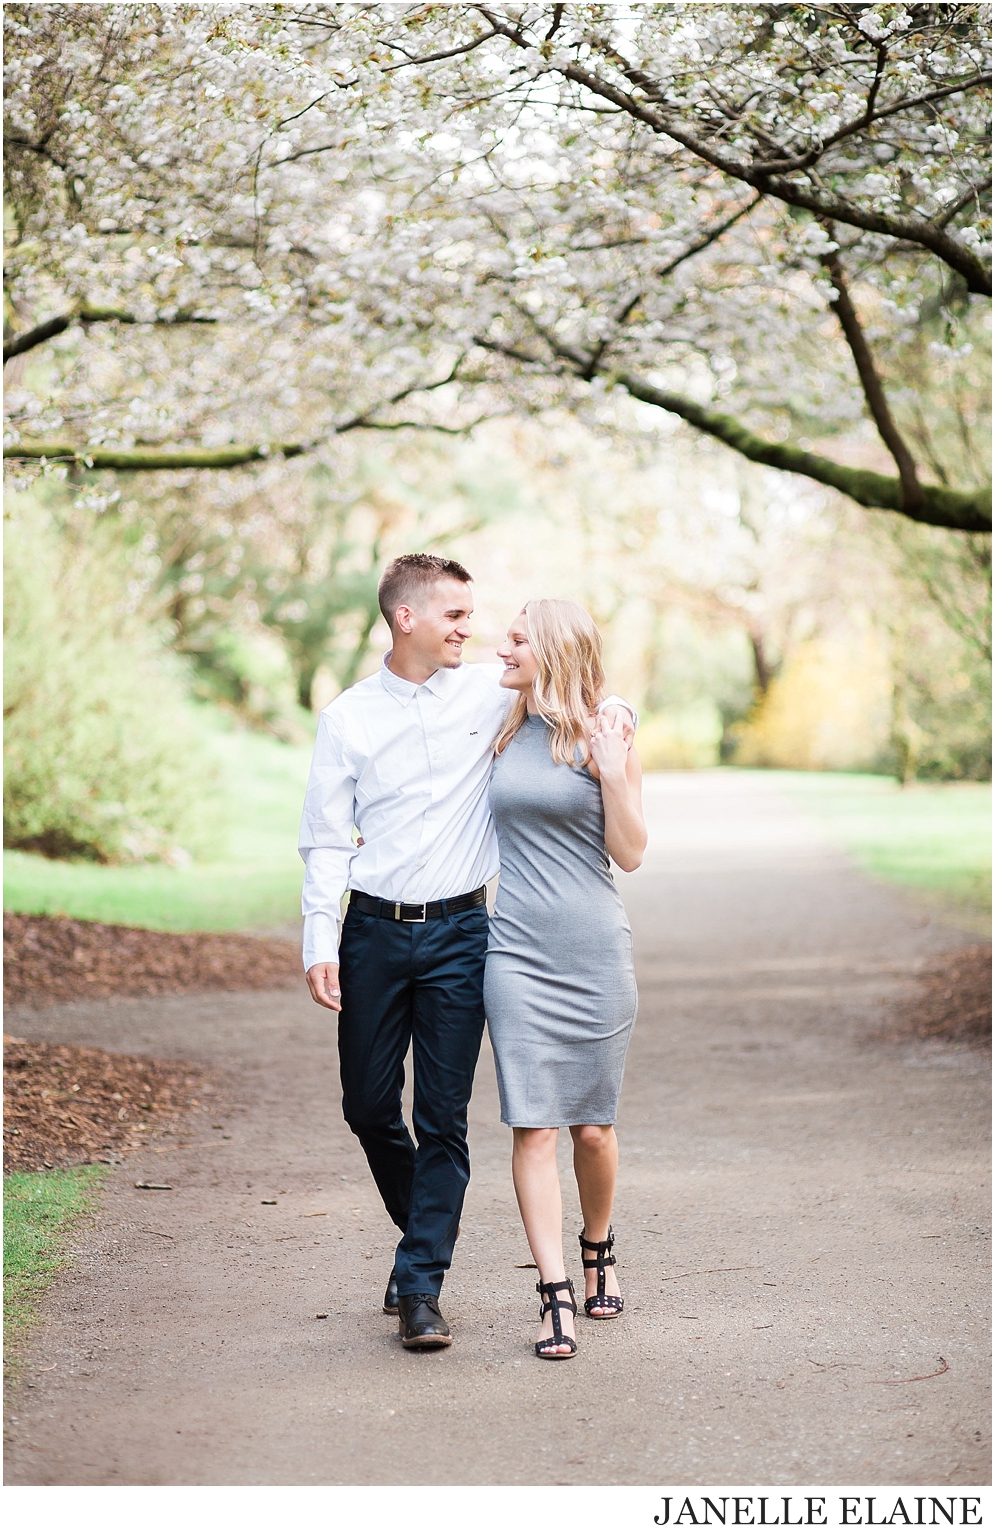 tricia and nate engagement photos-janelle elaine photography-49.jpg